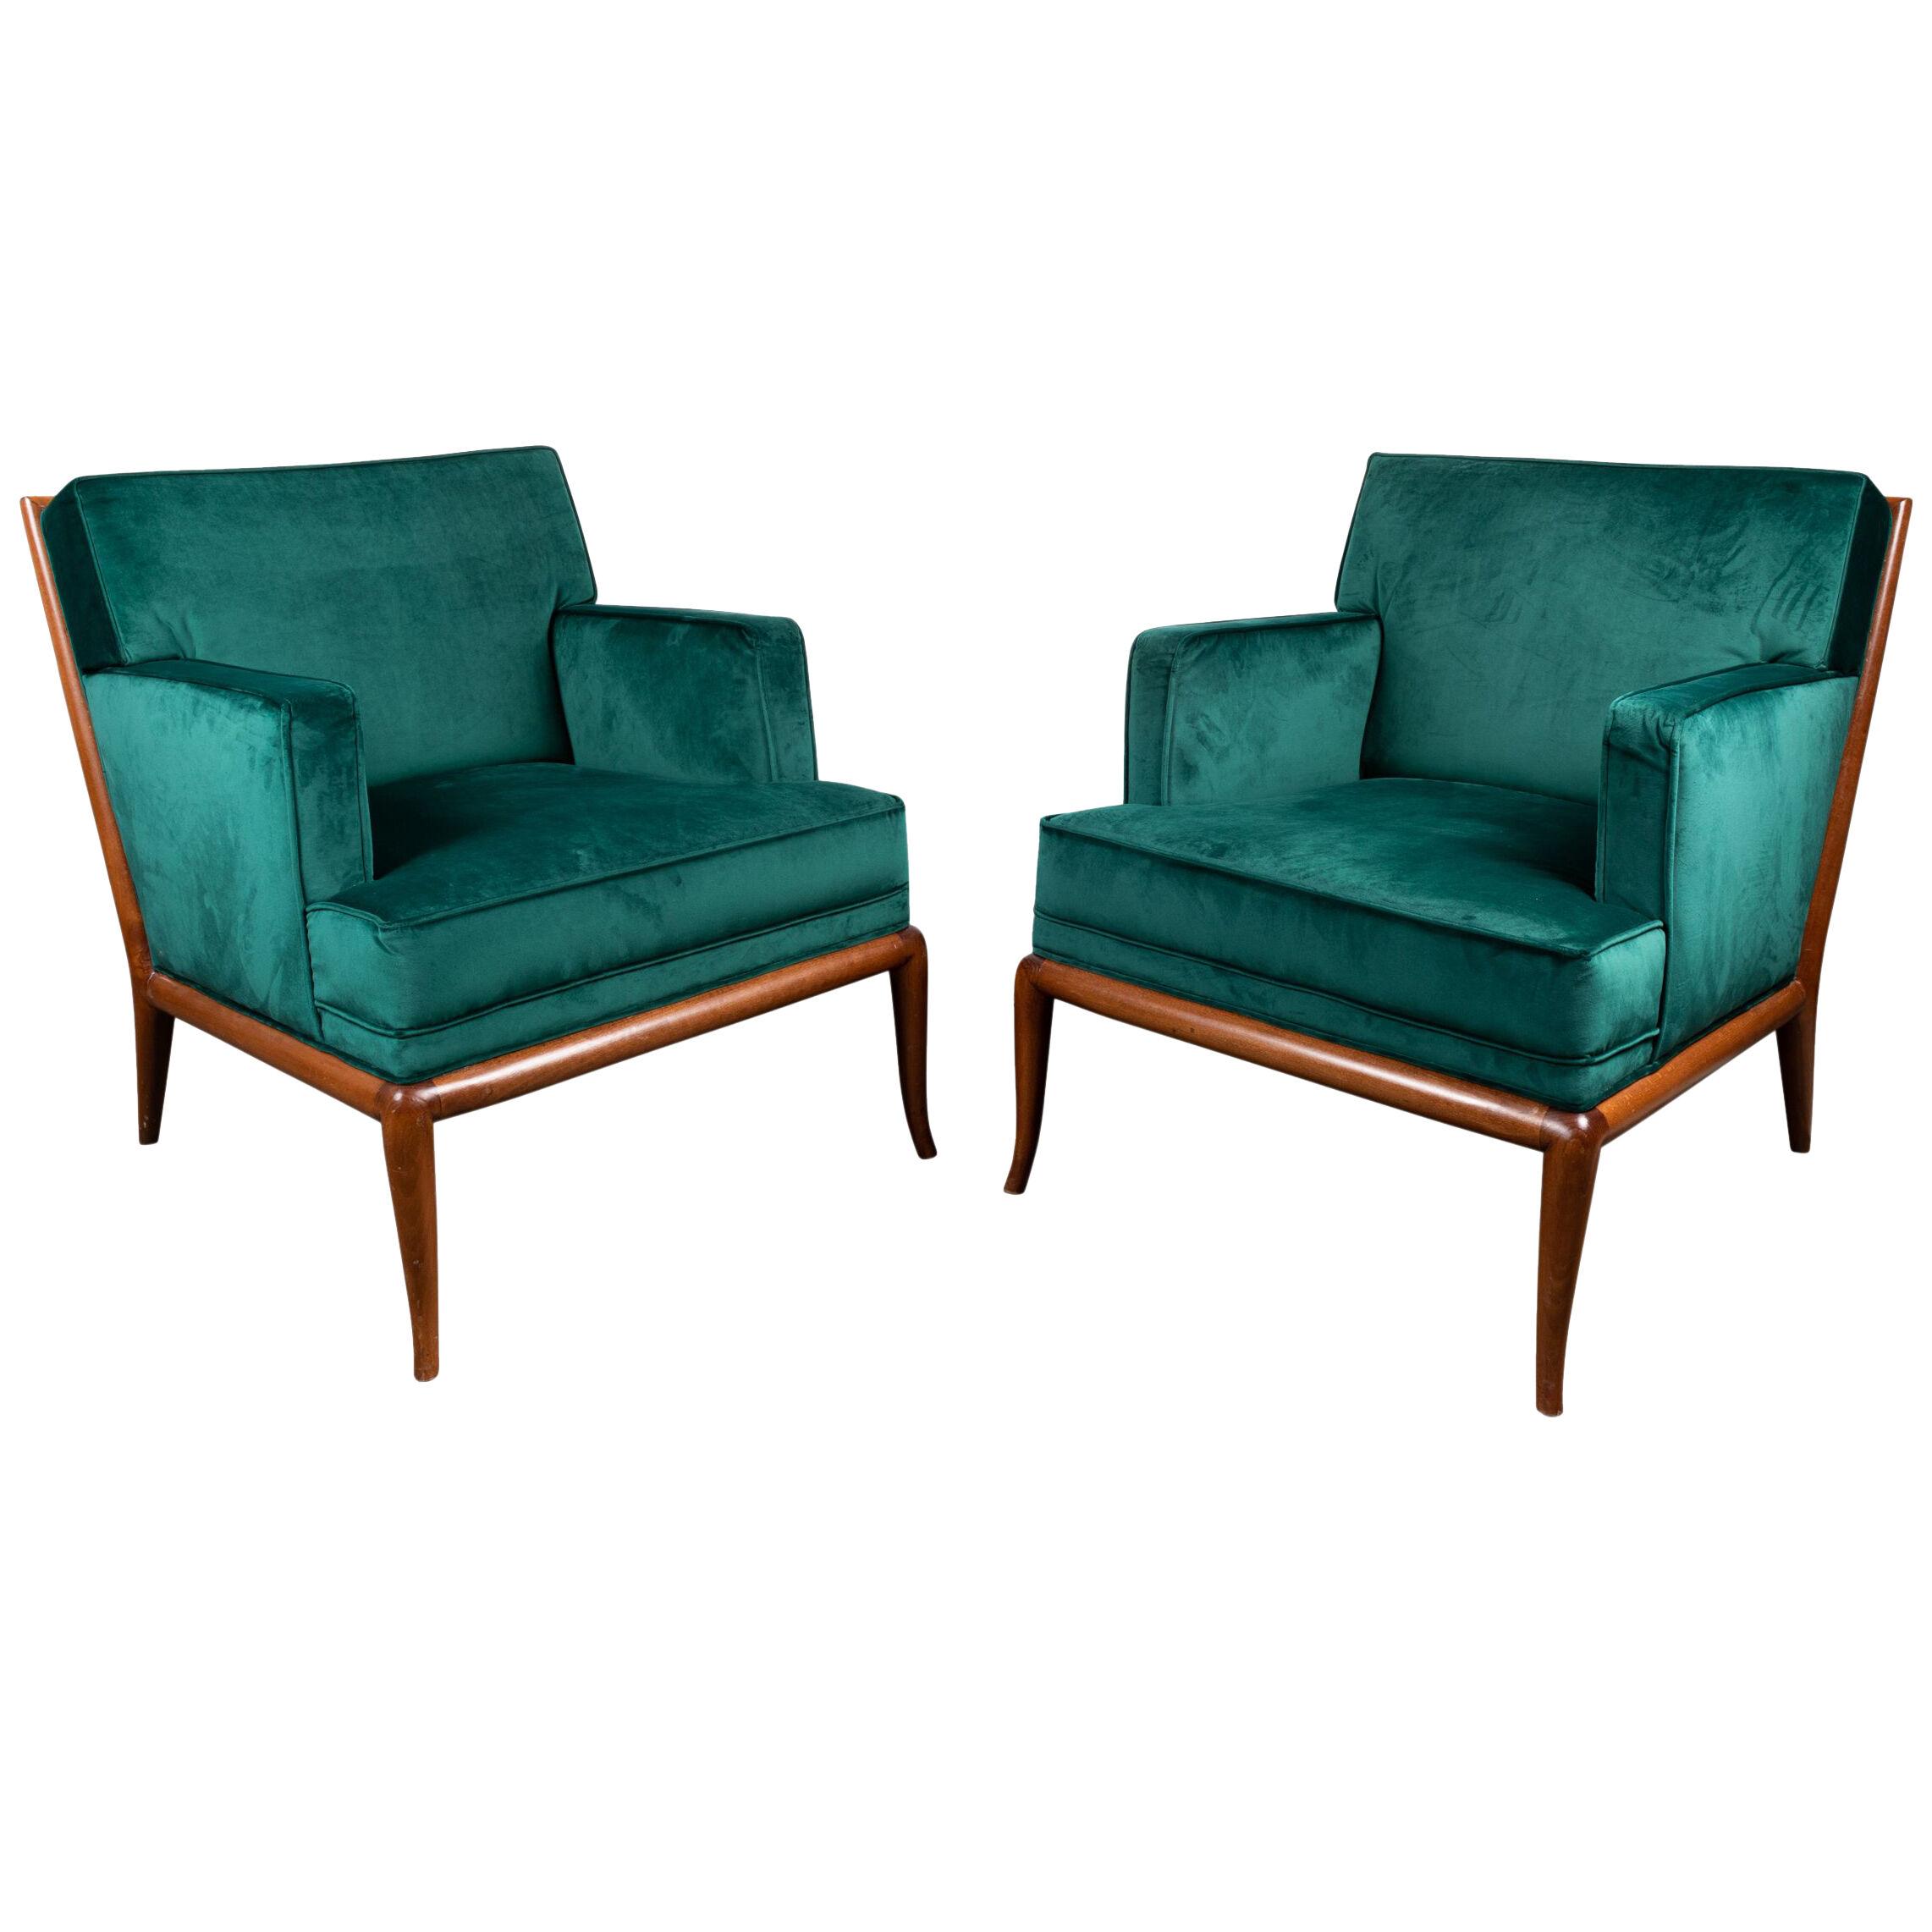  Pair of Lounge Chairs by Robsjohn-Gibbings for Widdicomb